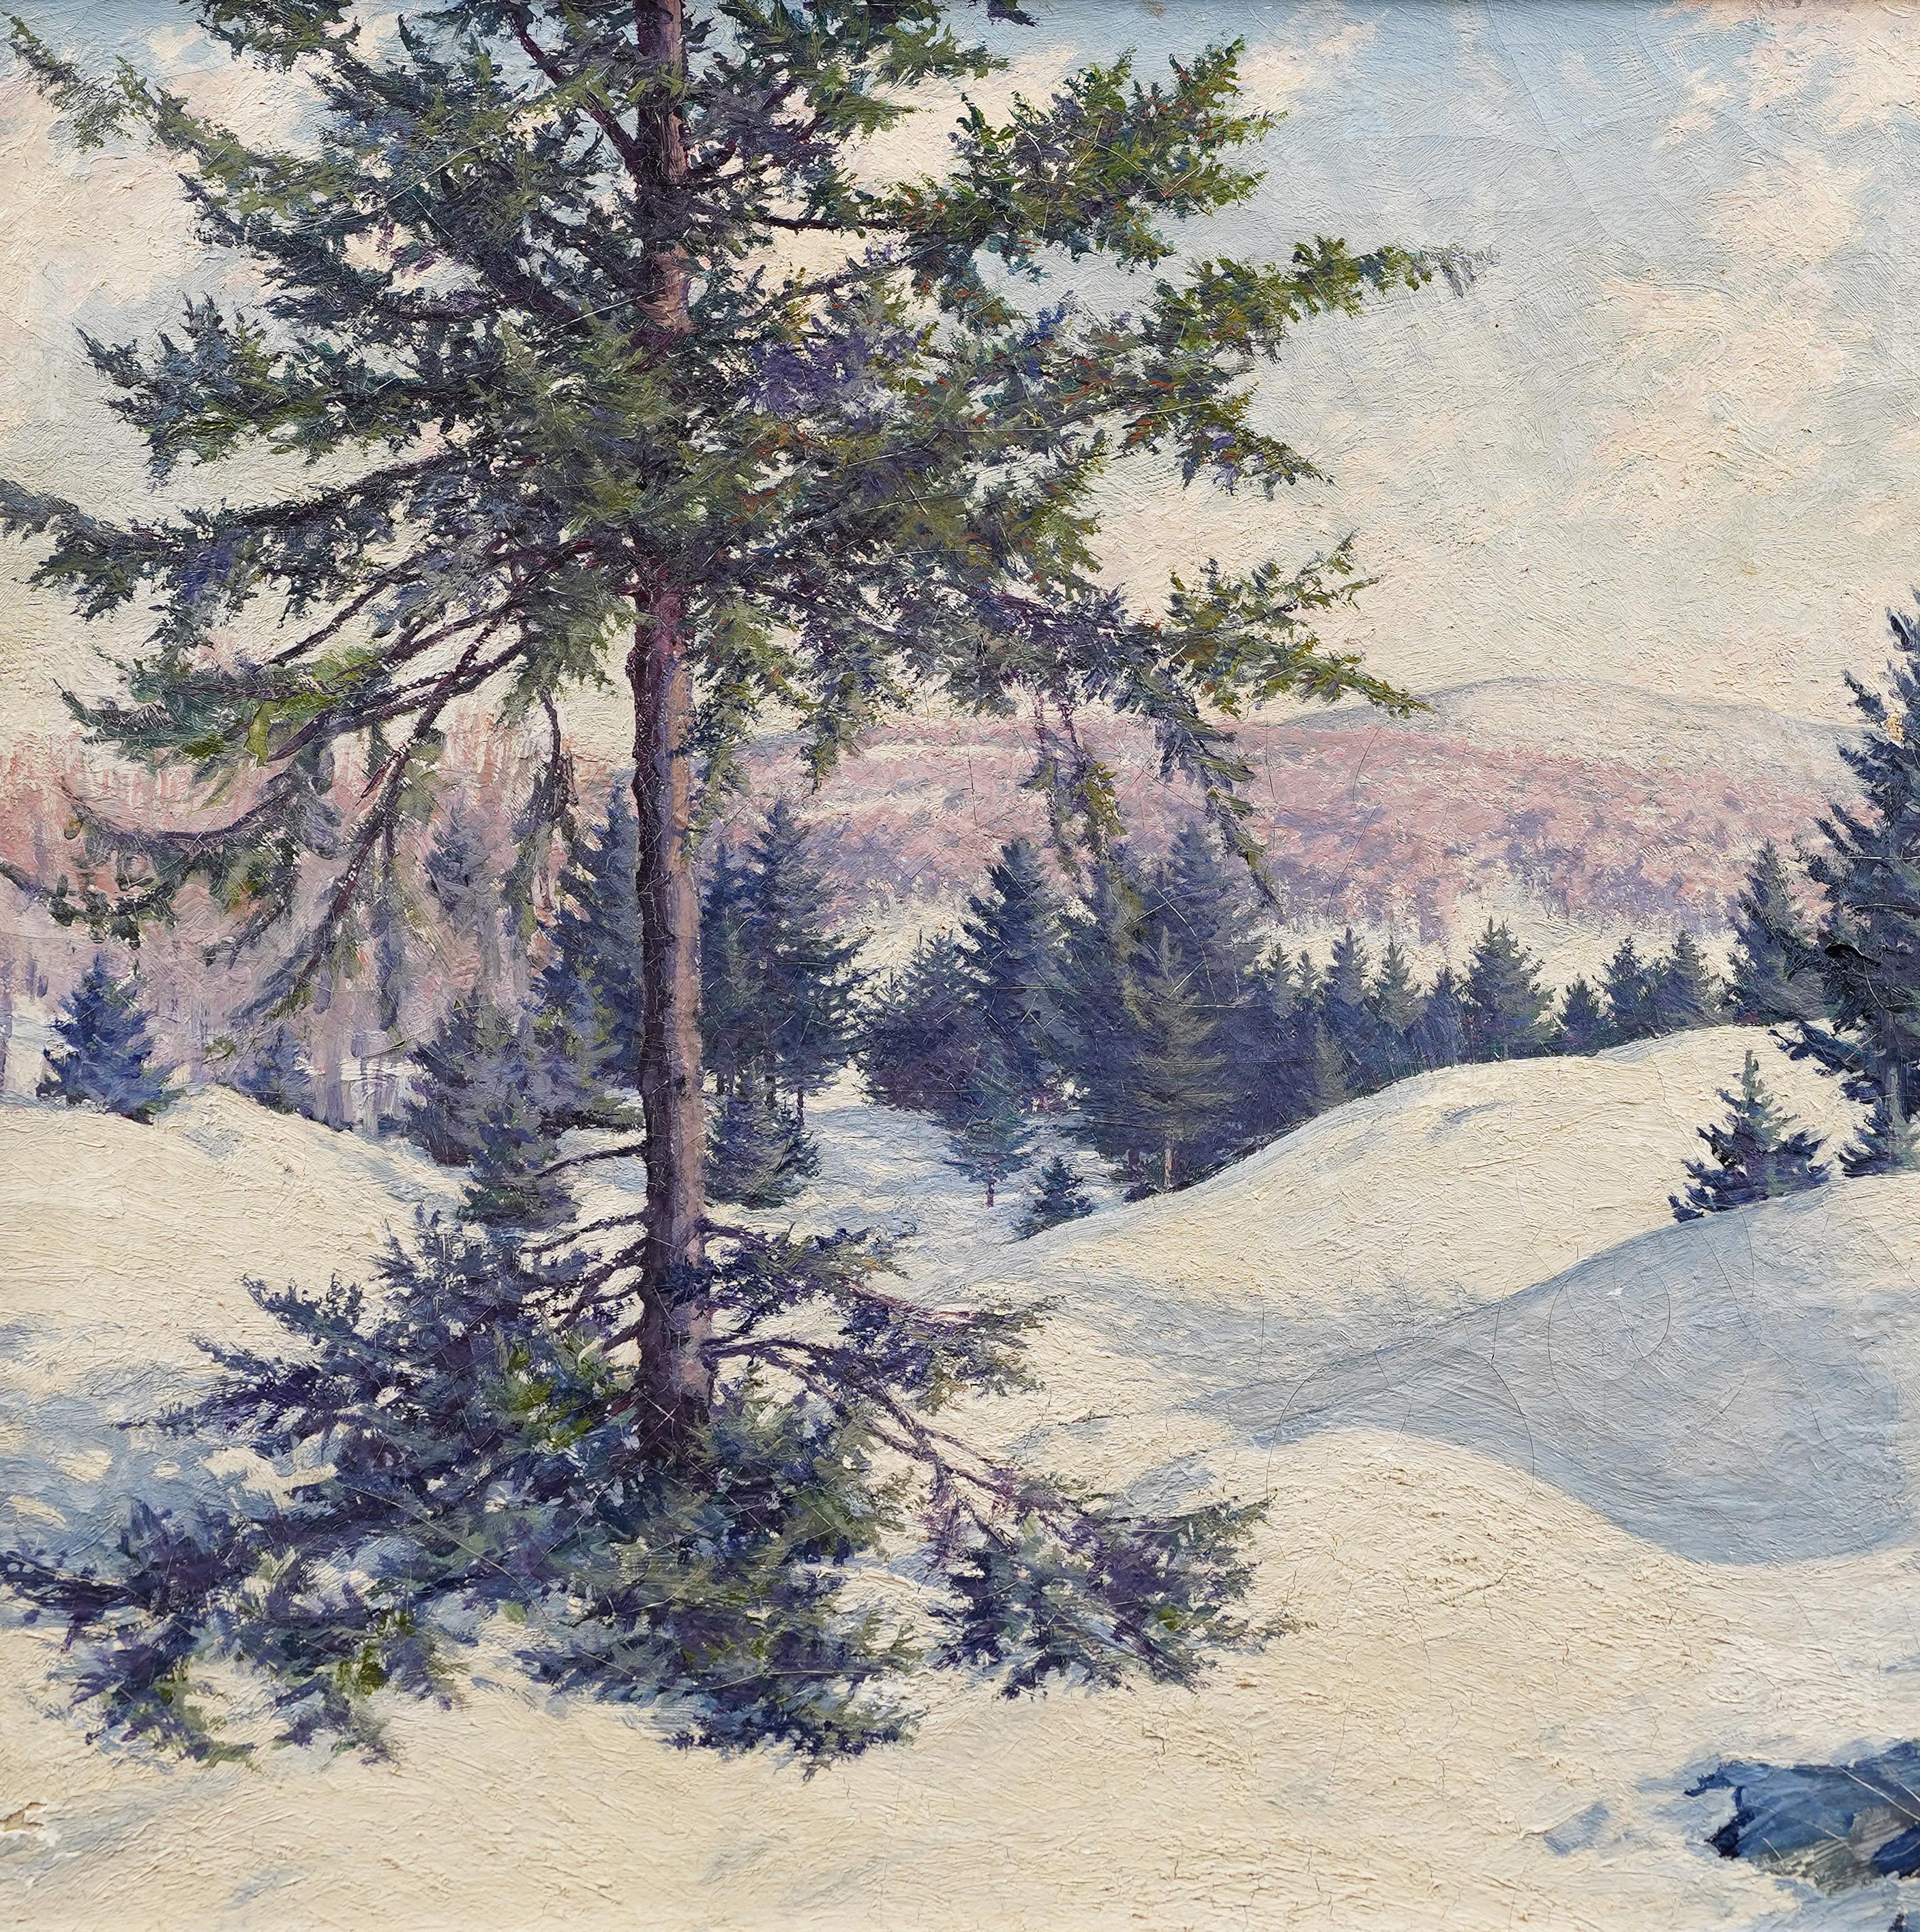 Antique American impressionist signed winter landscape oil painting by Dorothea (Dorothy) Taber Stafford (1902 - 1985).  Oil on canvas.  Signed.  Framed.  Image size, 20L x 16H.